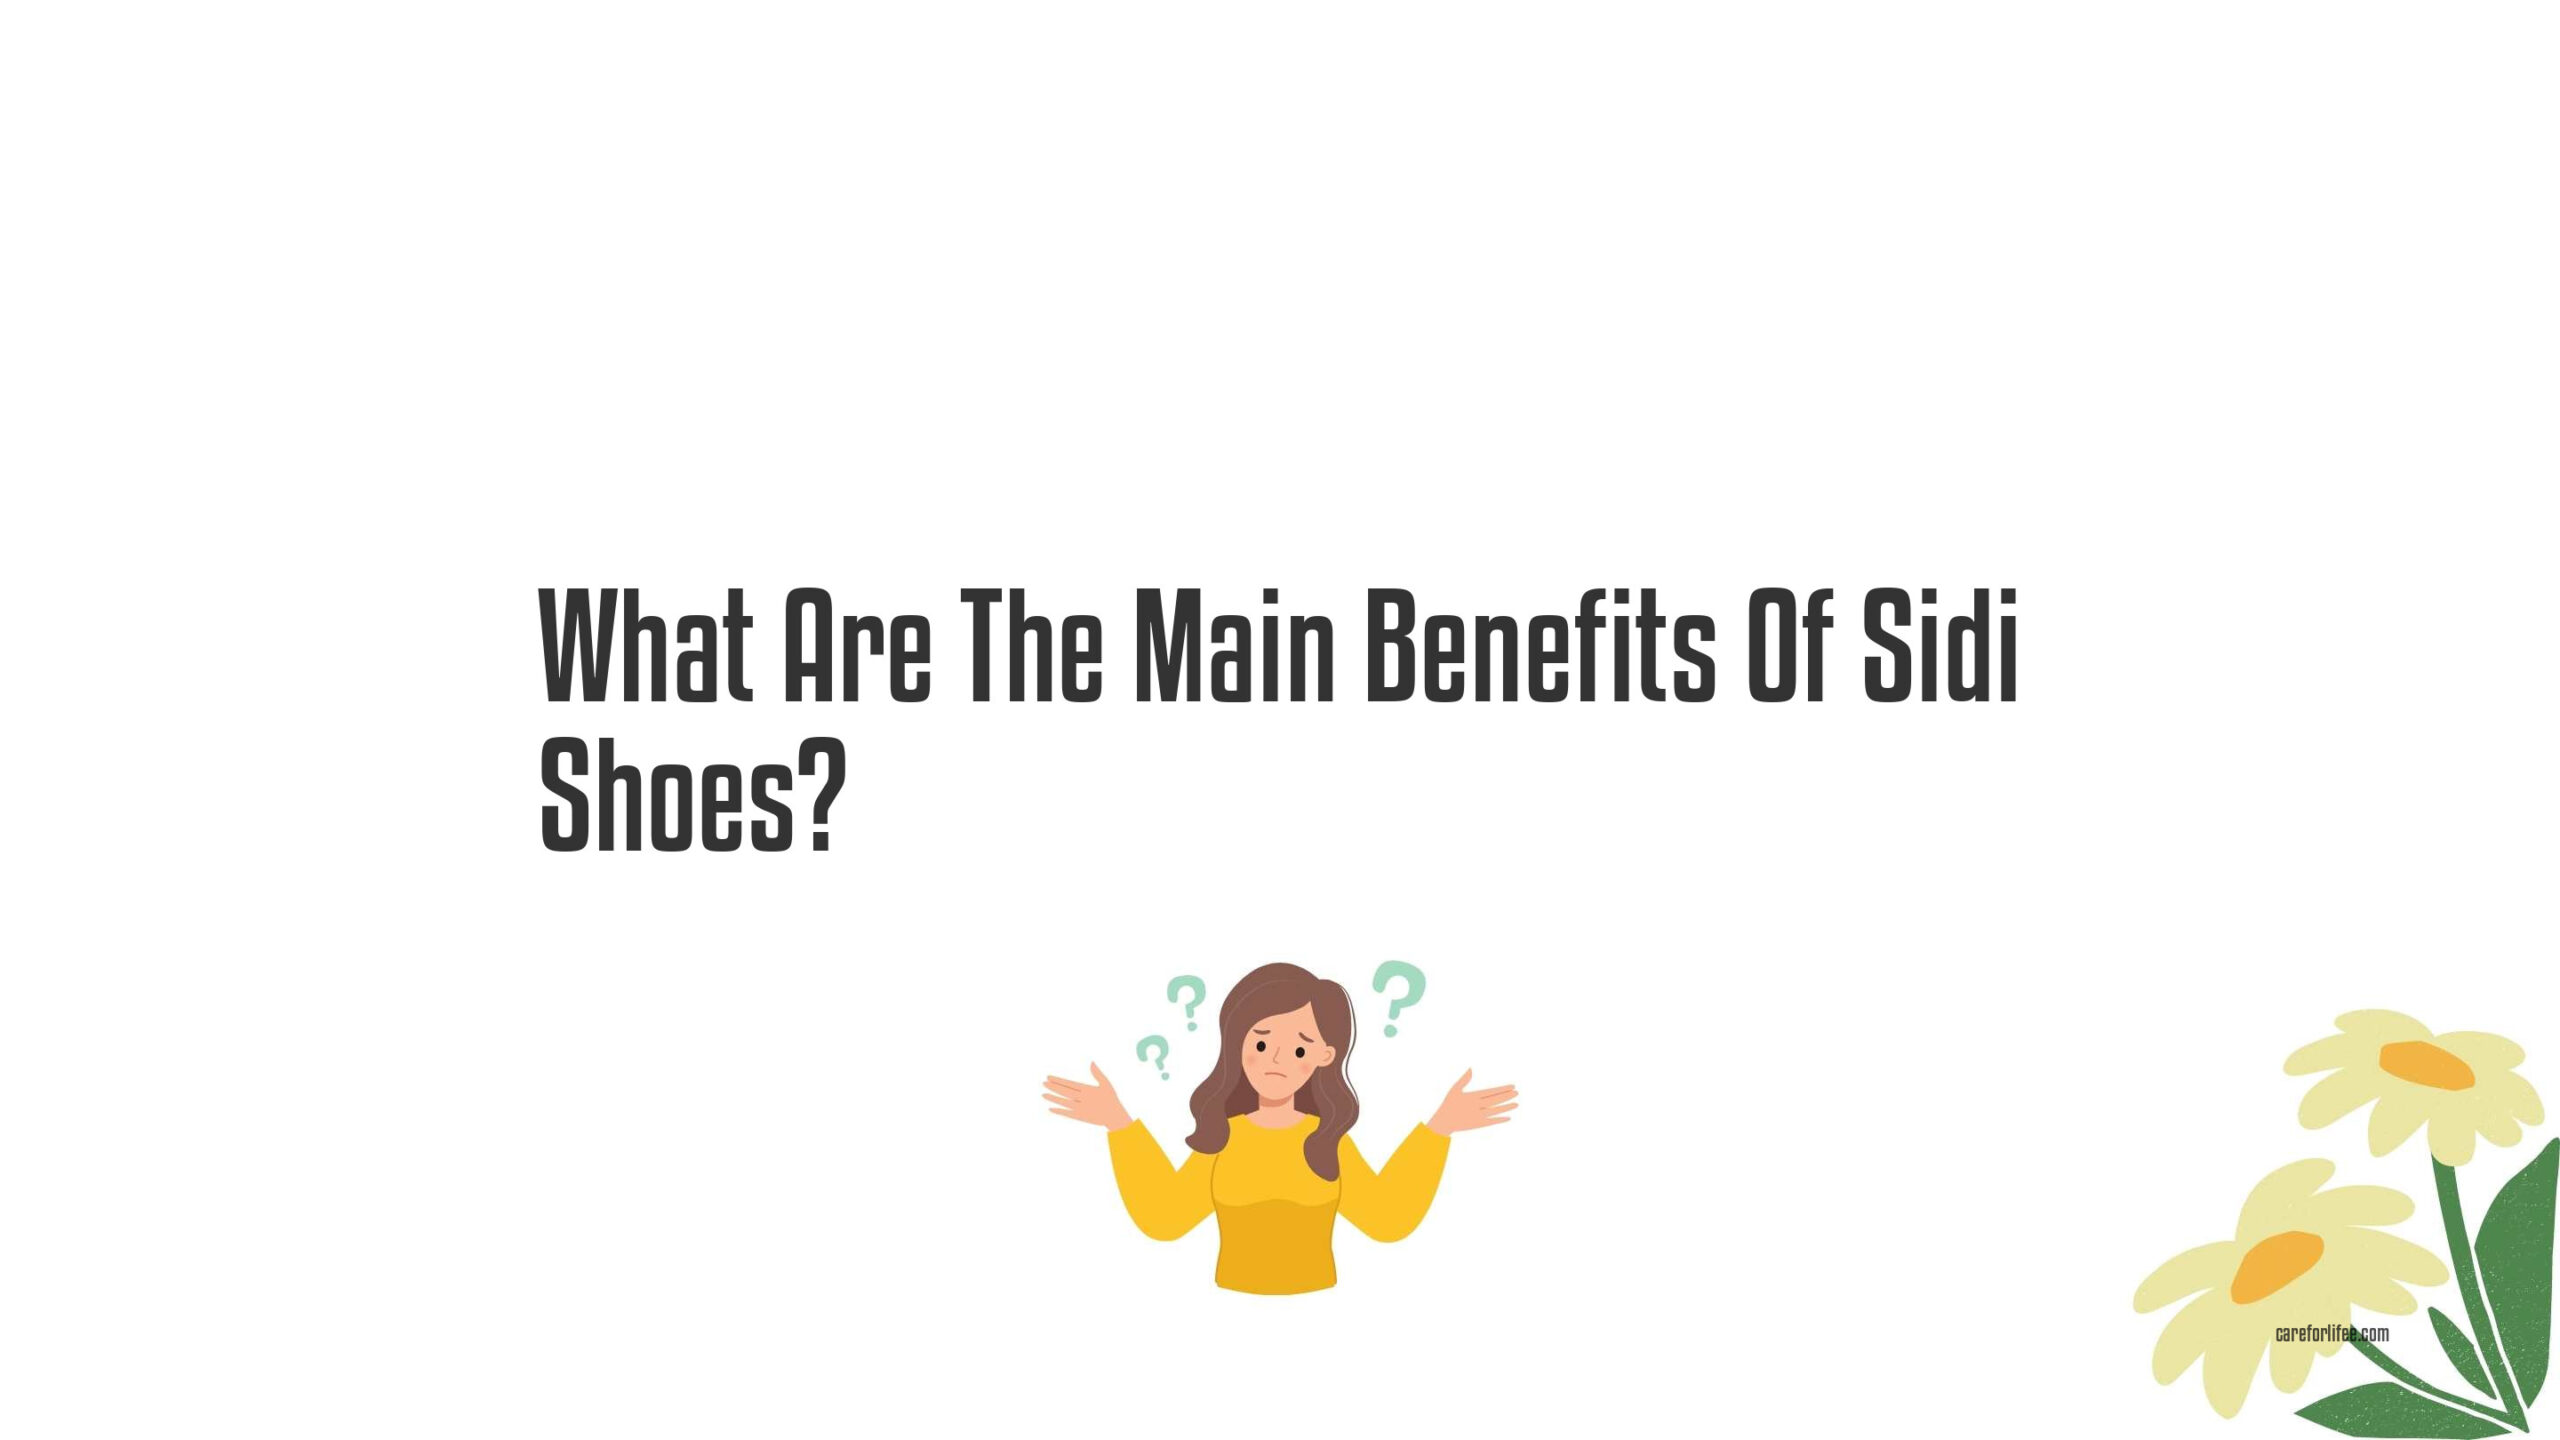 What Are The Main Benefits Of Sidi Shoes?